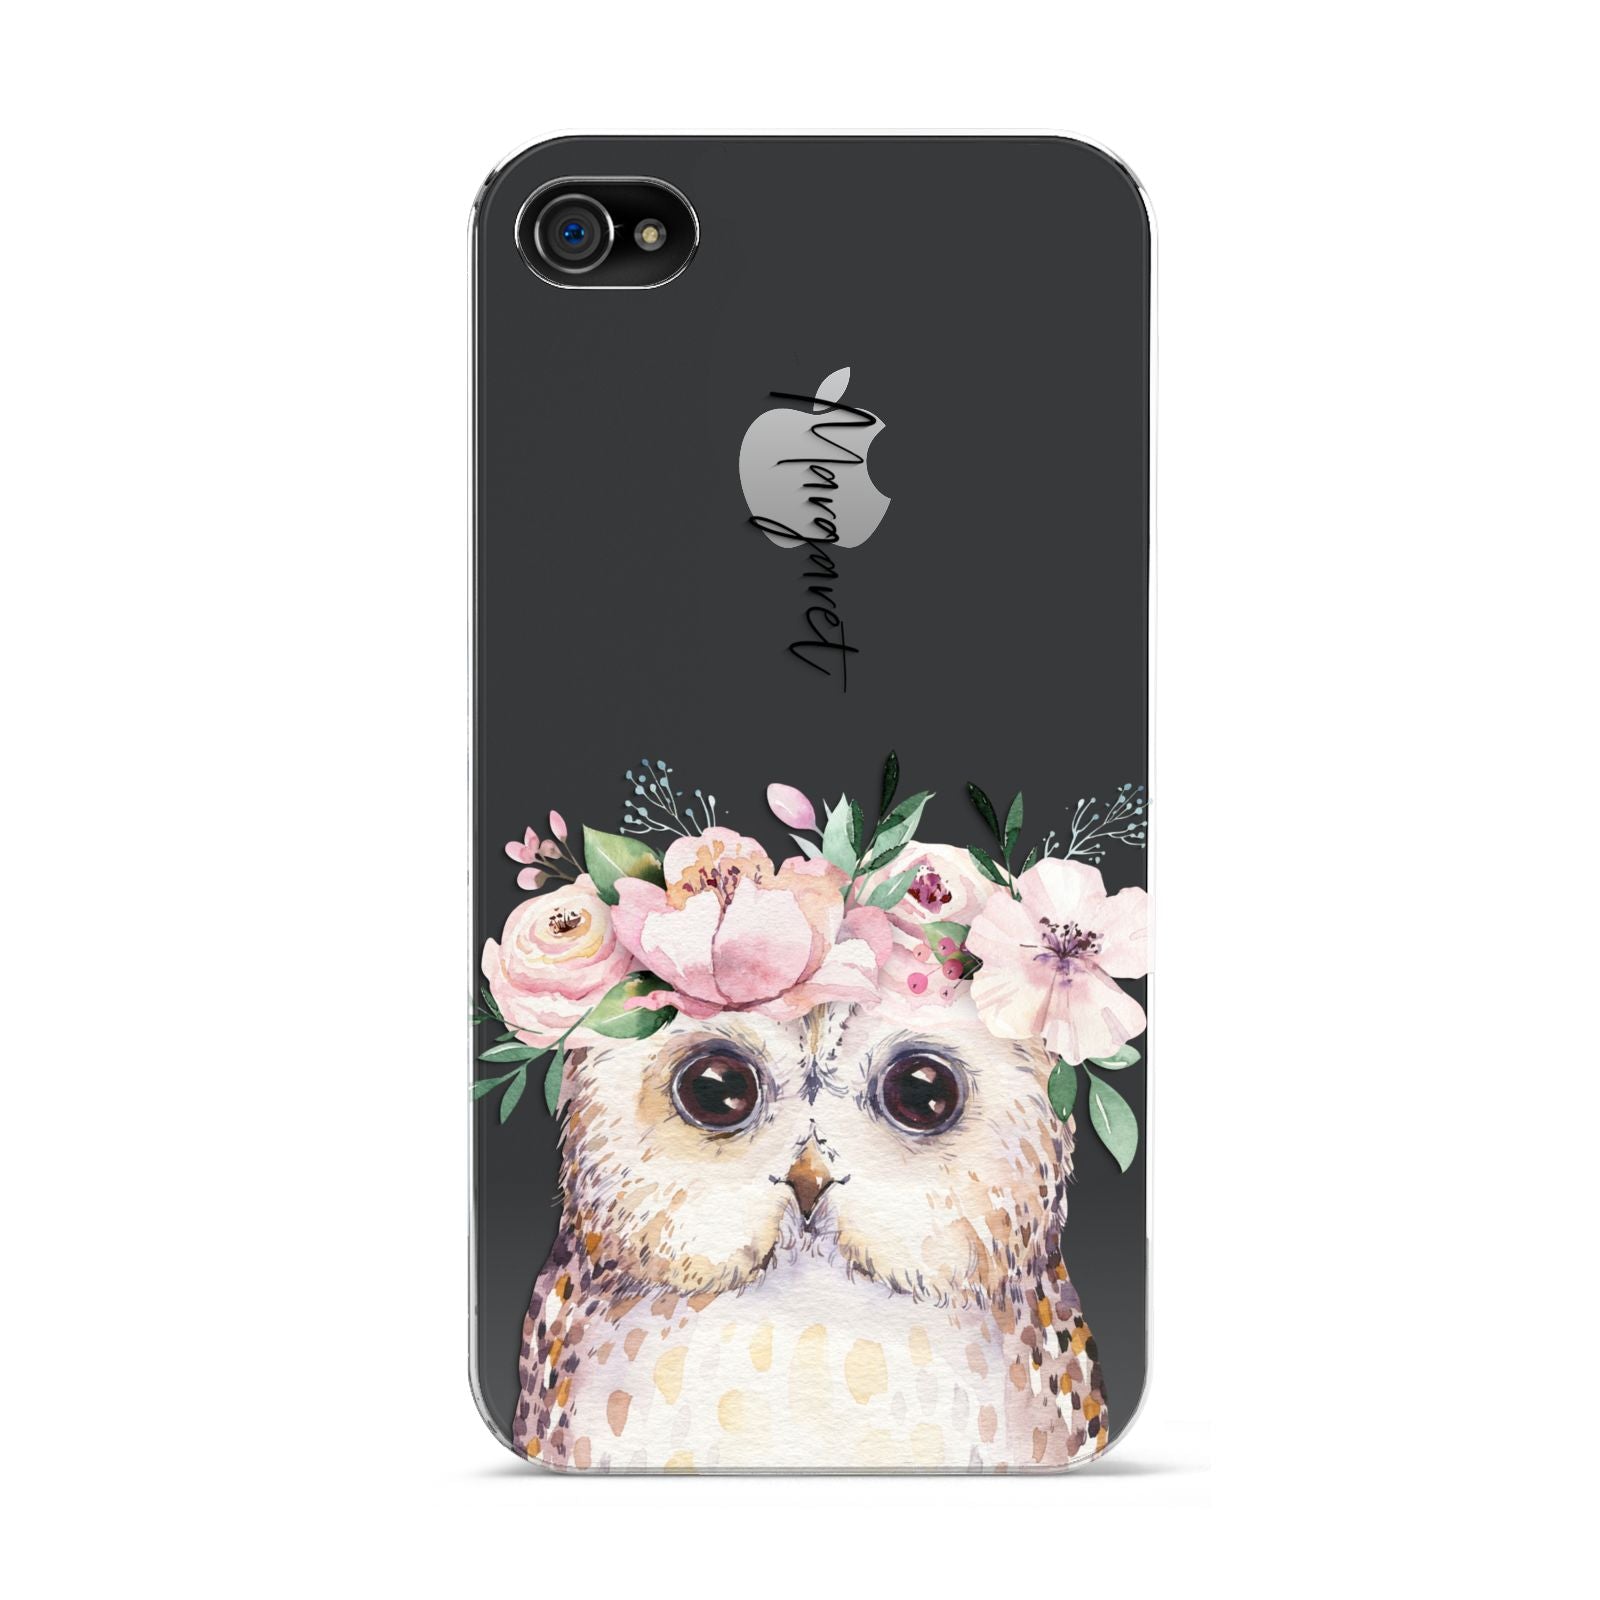 Personalised Name Owl Apple iPhone 4s Case